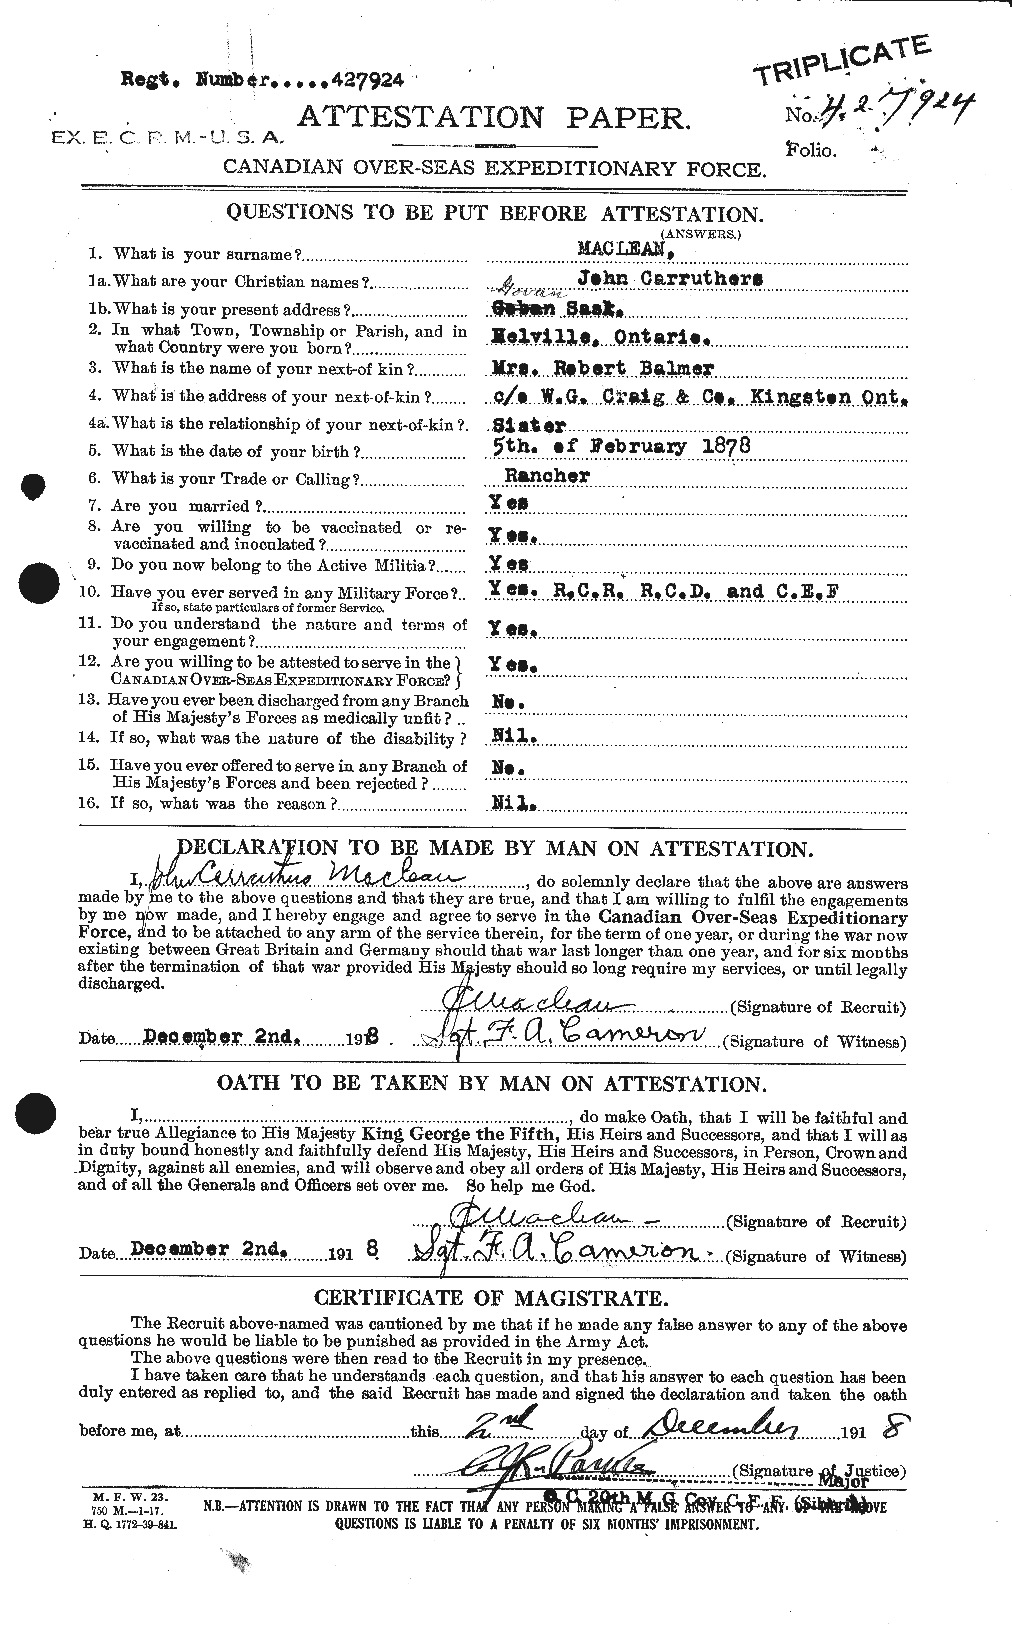 Personnel Records of the First World War - CEF 531802a